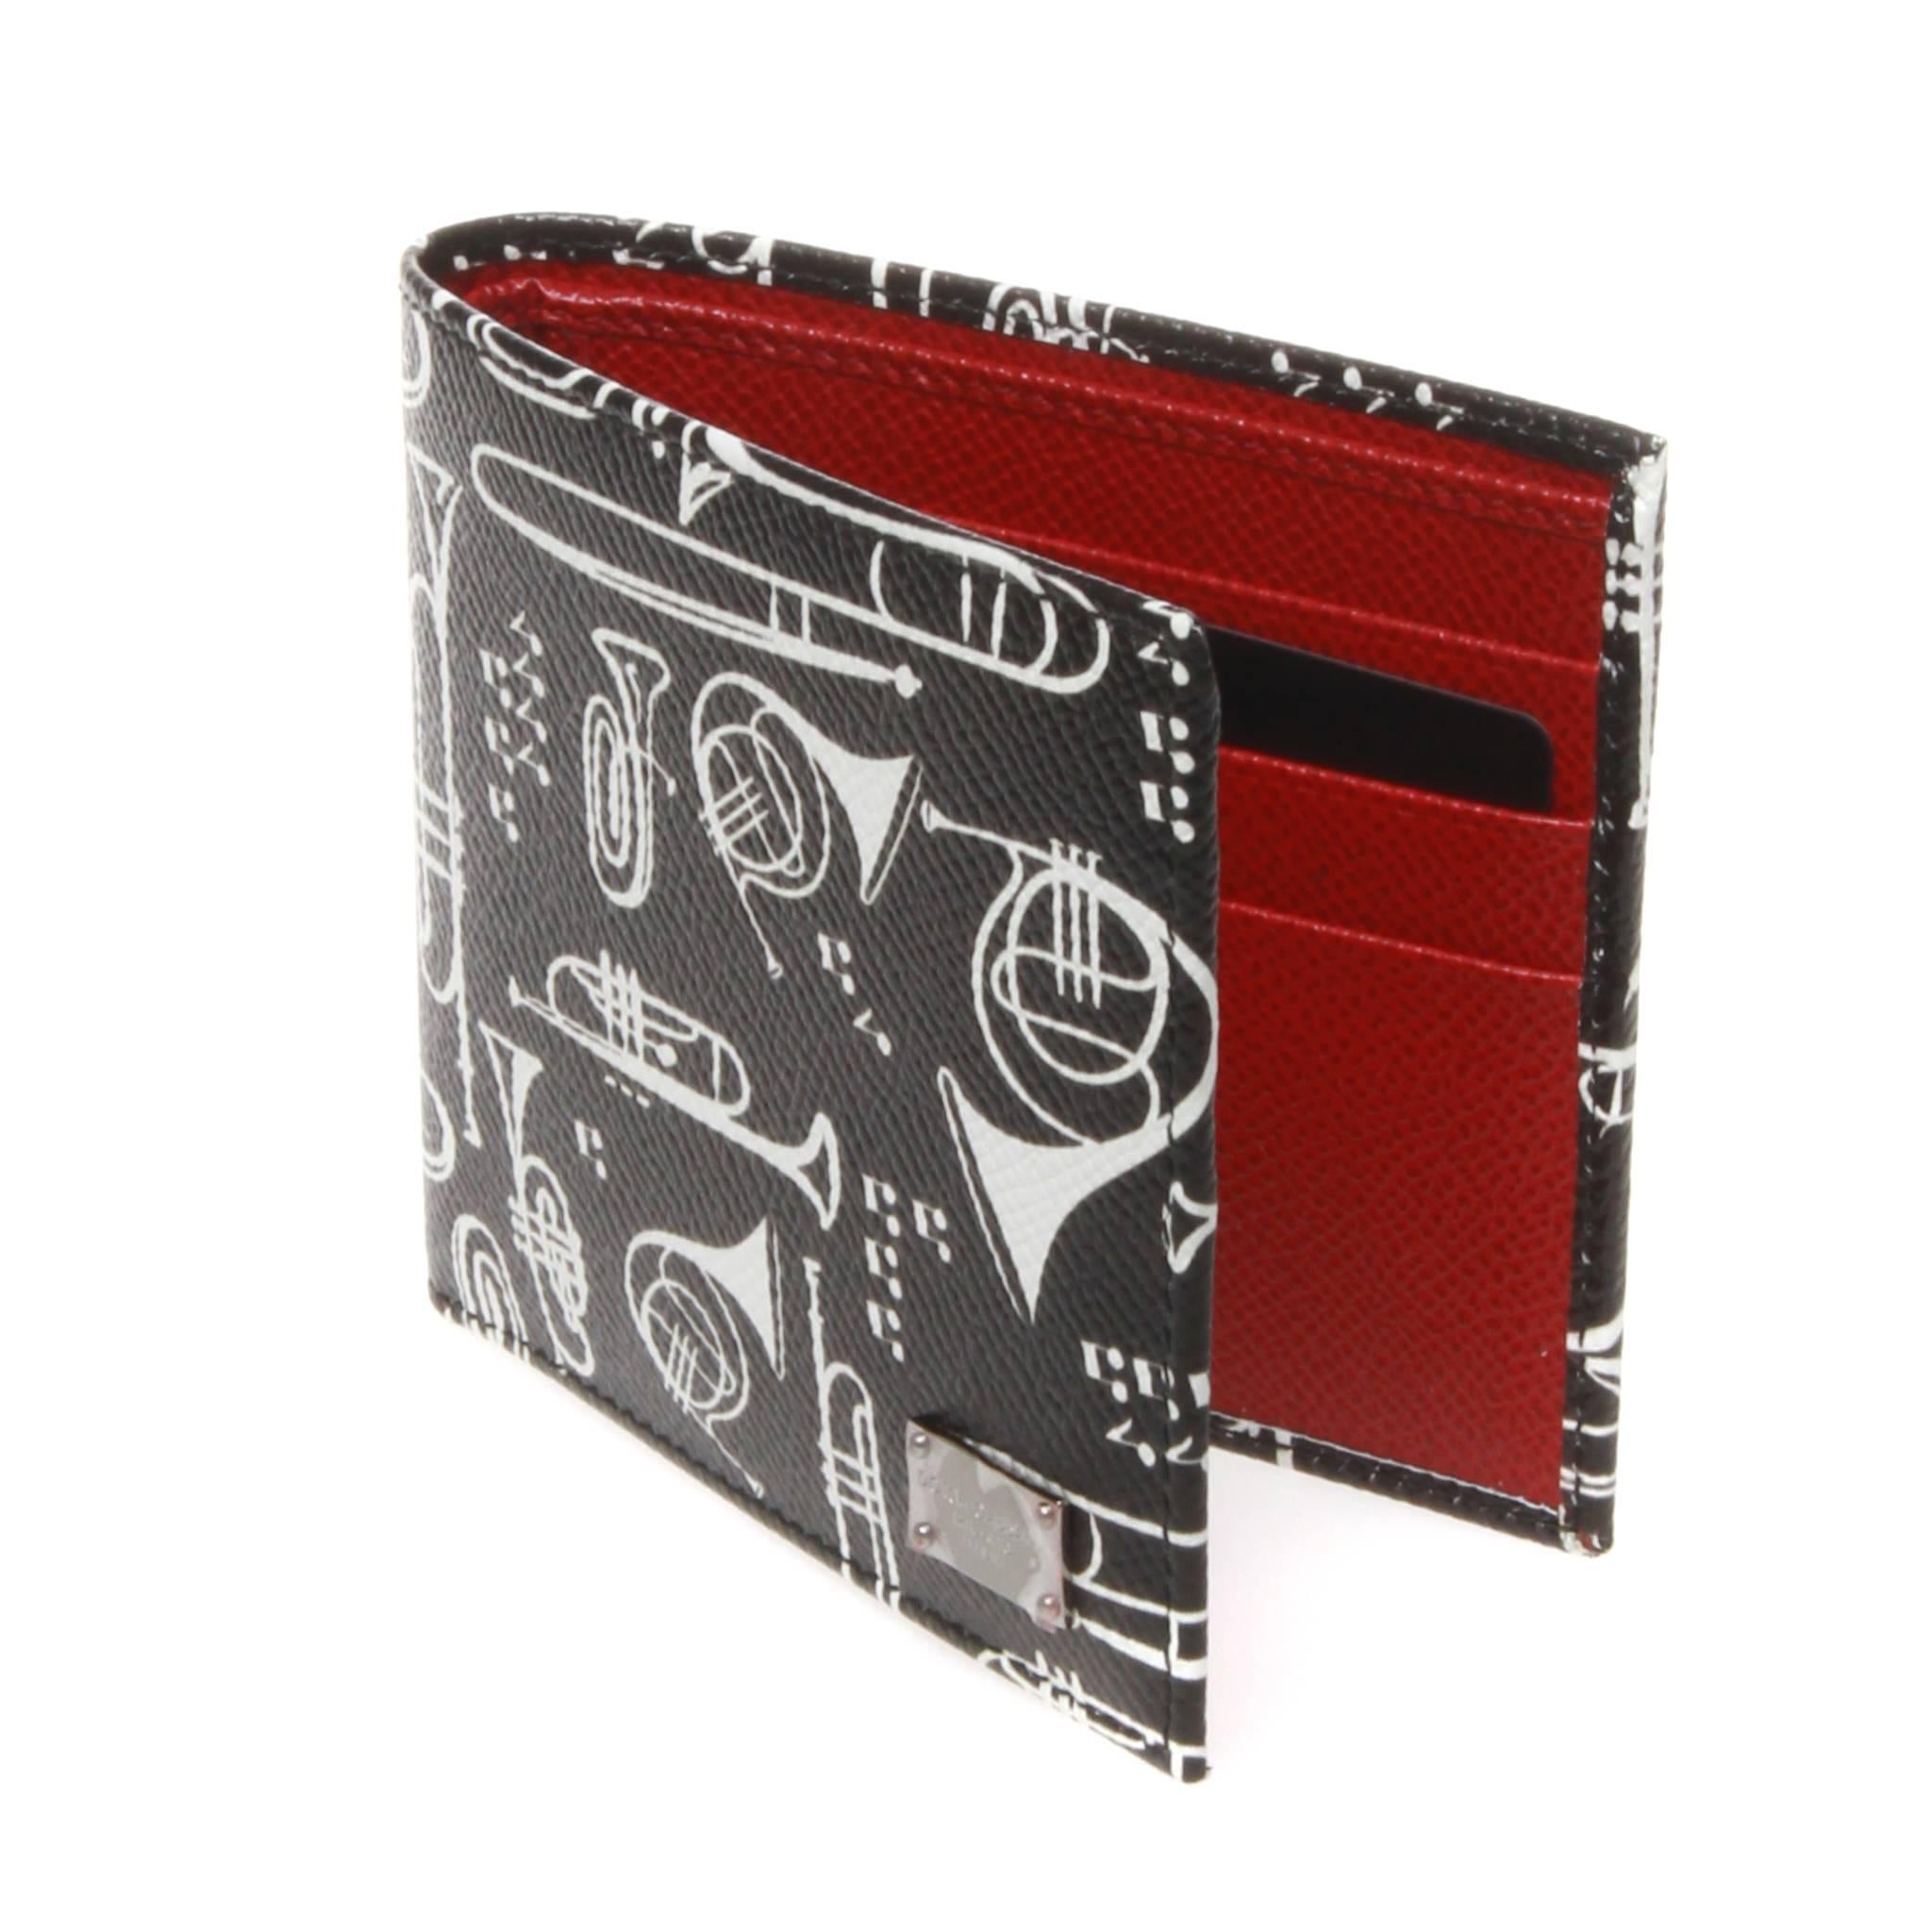 Dolce and Gabbana saffiano leather bi-fold wallet showing an all-over contrasting black and white brass horn motif. Interior is a rich red saffiano and has eight card slots, four slots for receipts and a bill section. Small silver brand plaque at